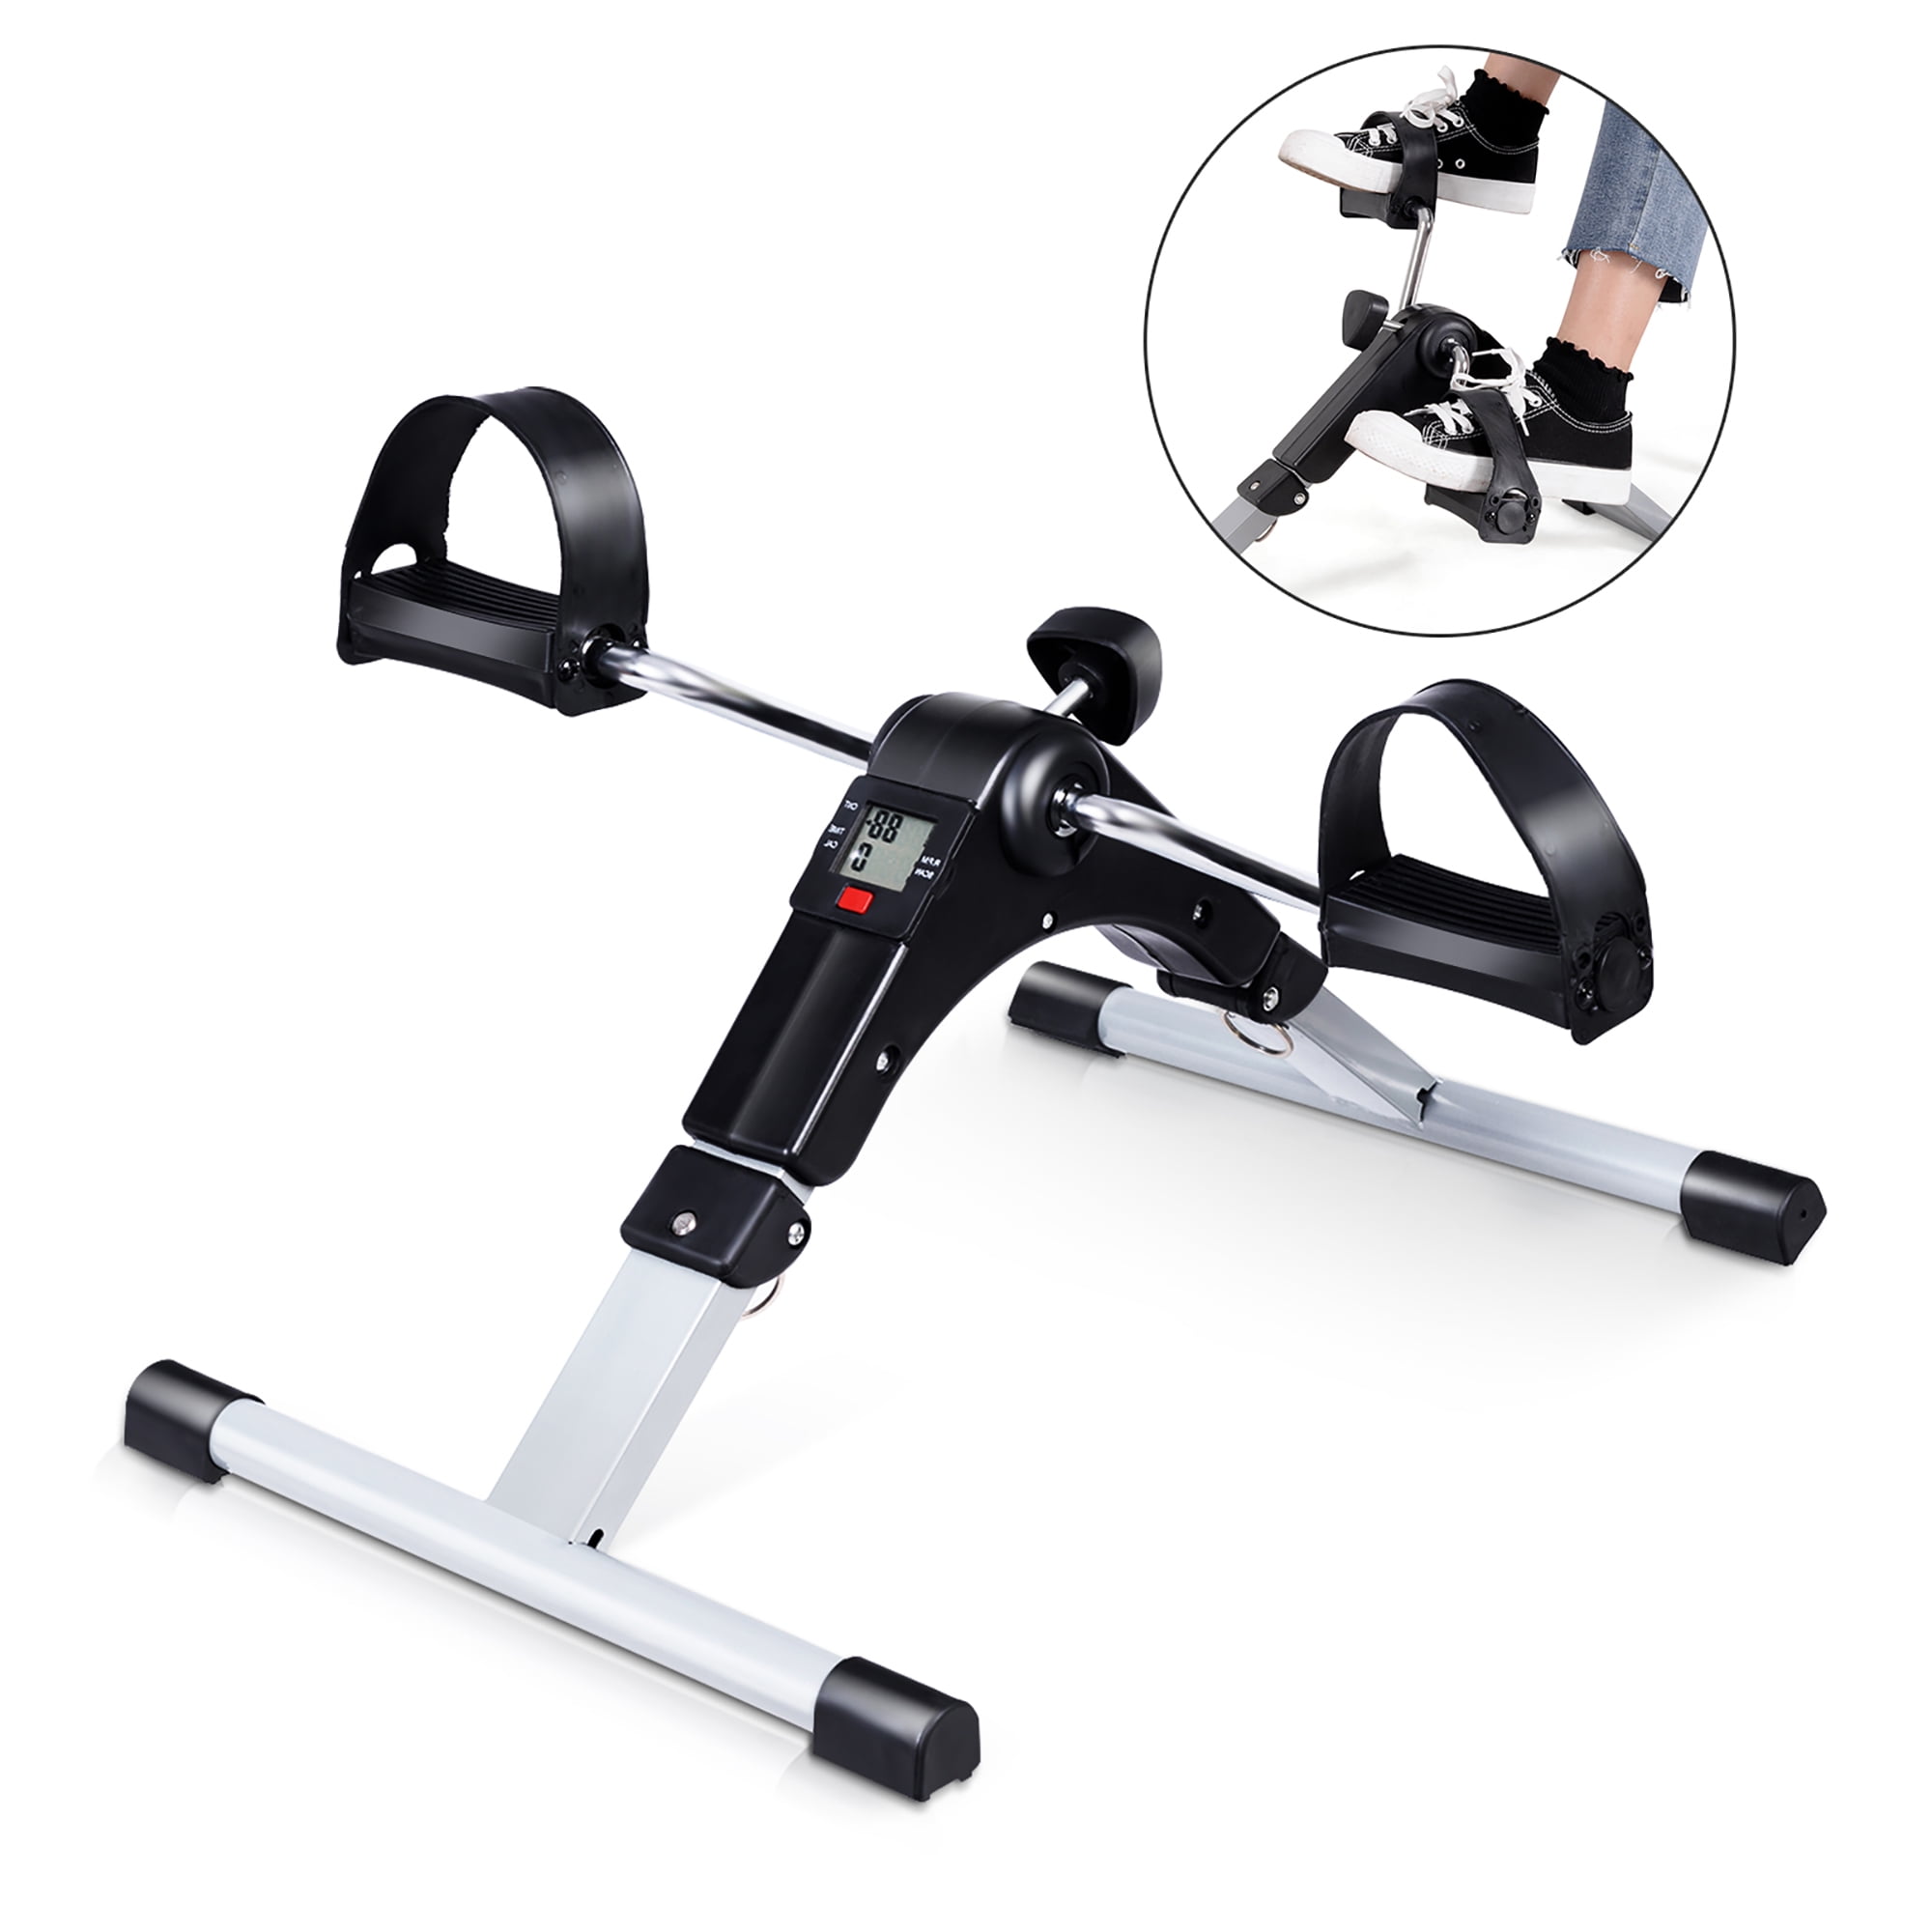 Portable Fitness Pedal Stationary Bike Indoor Exerciser For Arms Legs Physical 